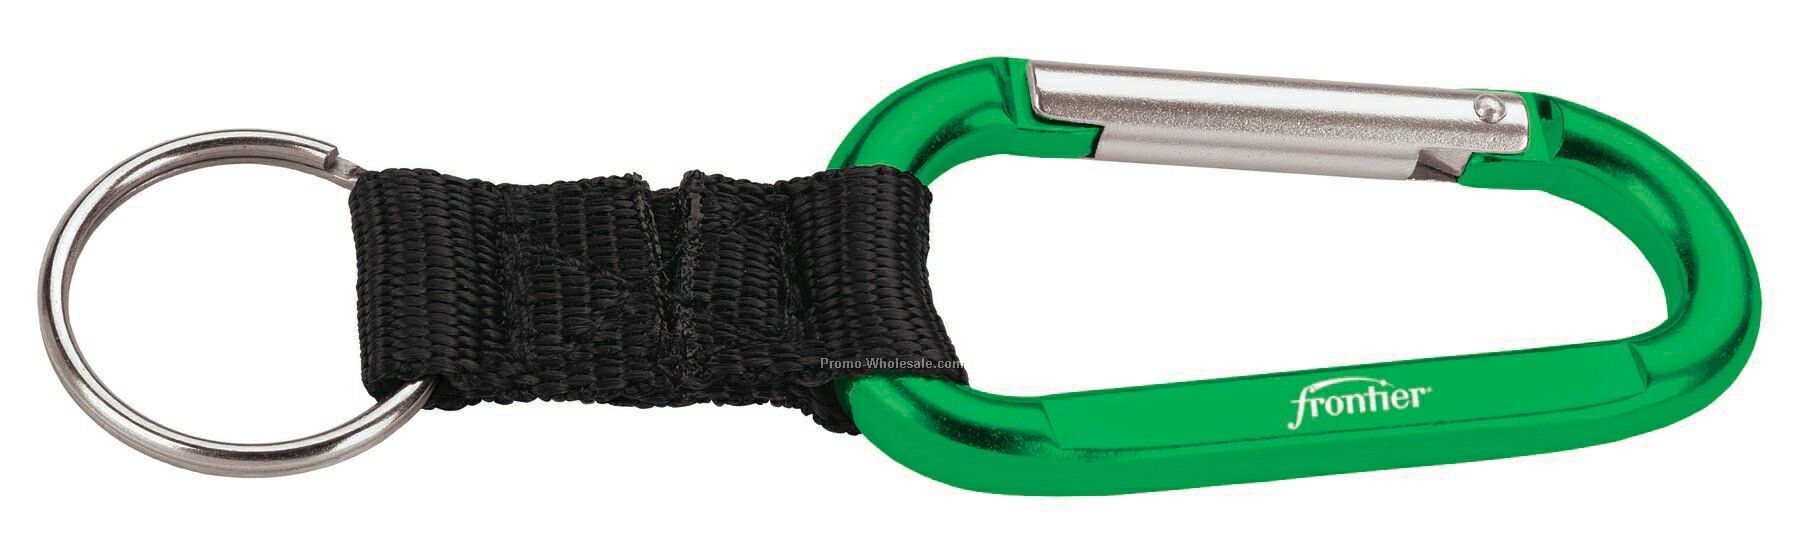 V-line Anodized Carabiner/ Keychain